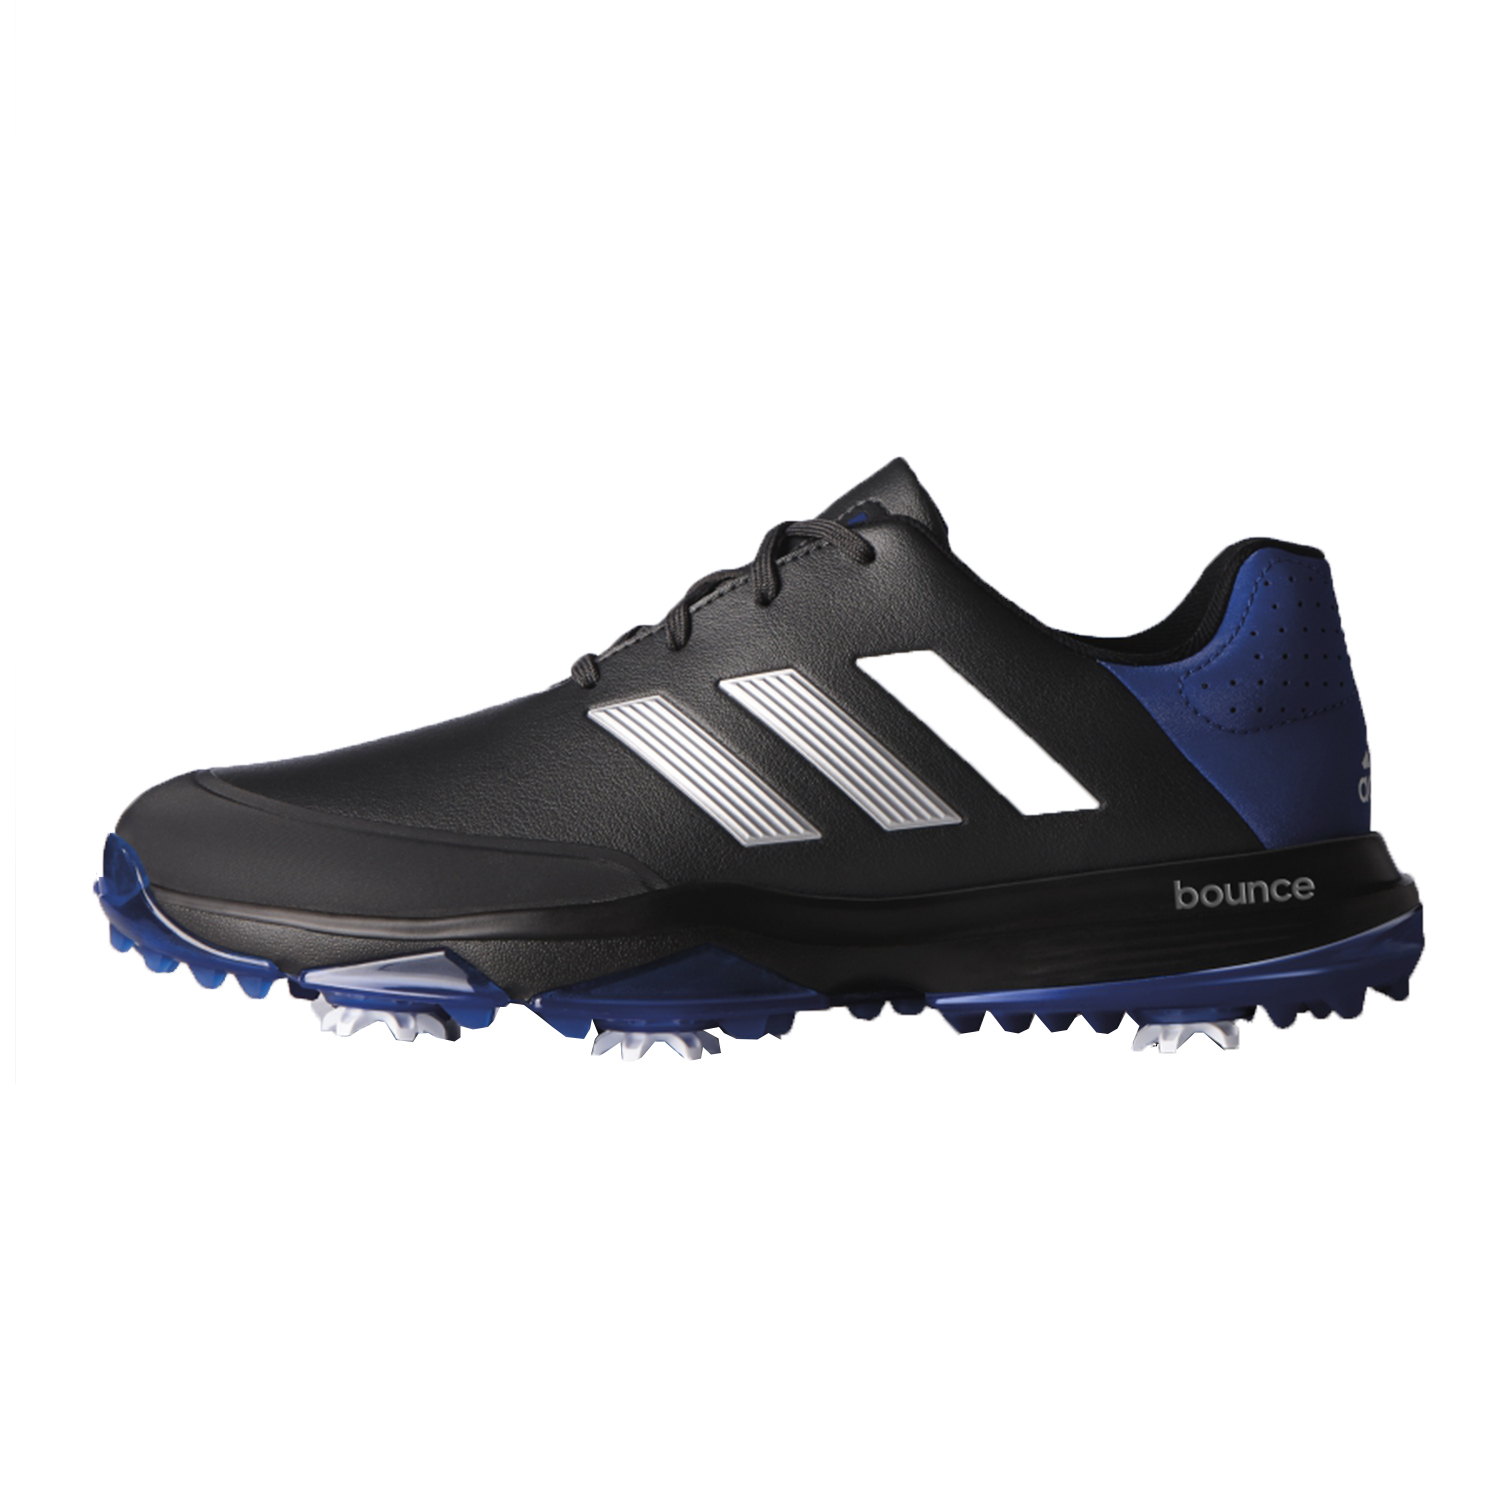 adipower bounce golf shoes